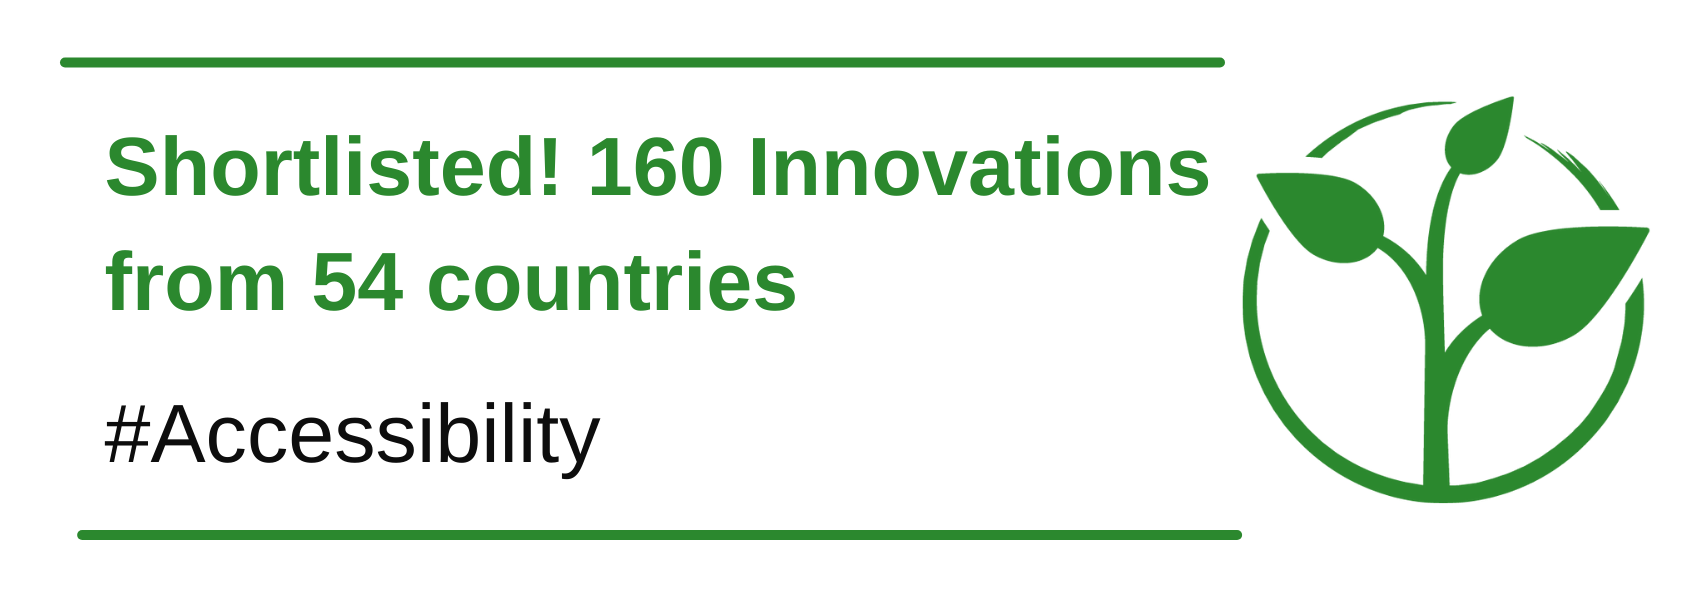 Zero Project logo and Text reading "Shortlisted! 160 innovations from 54 countries #Accessibility"